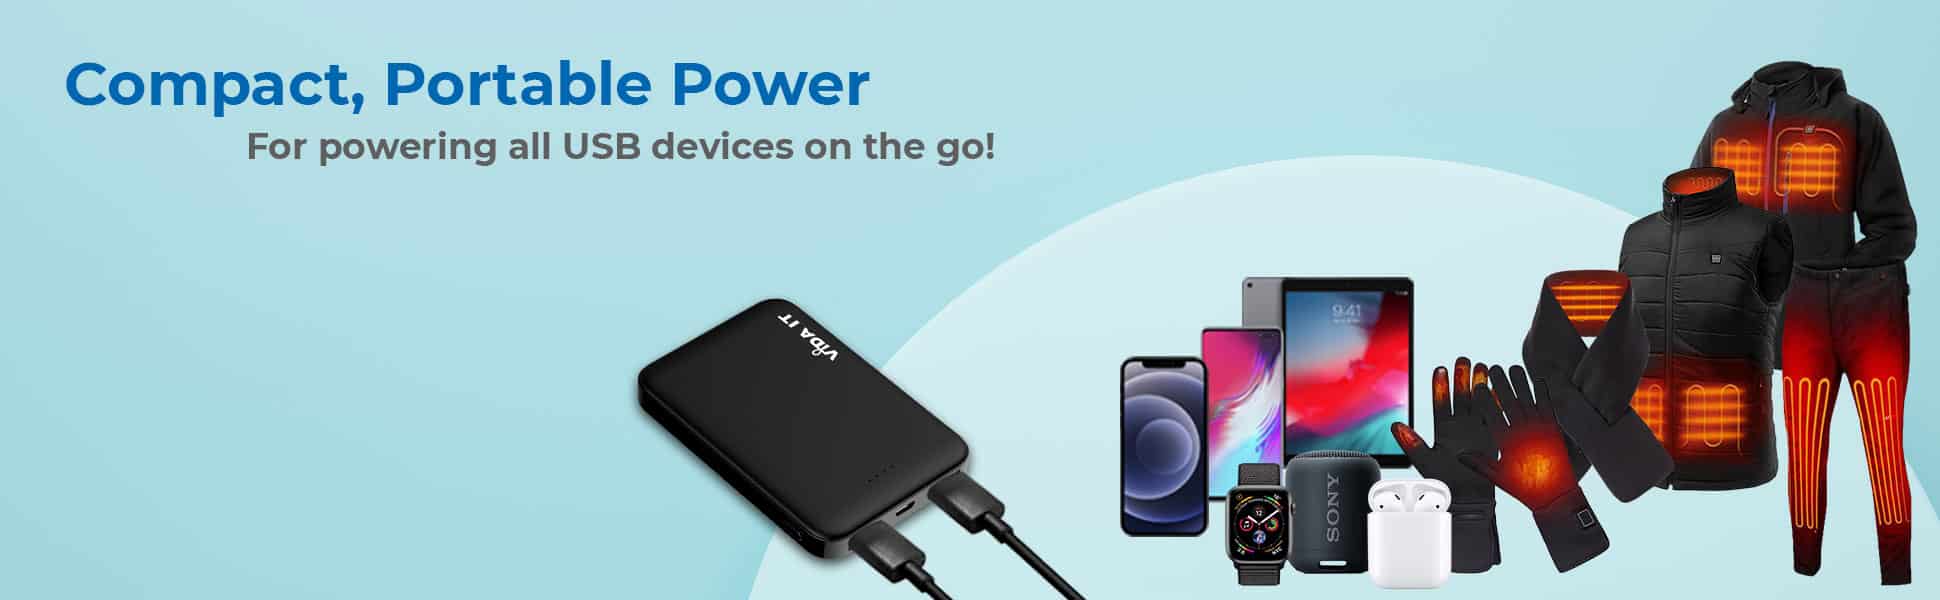 vida it vpow power bank battery pack for heated vest jacket iphone samsung portable charger 5000mah